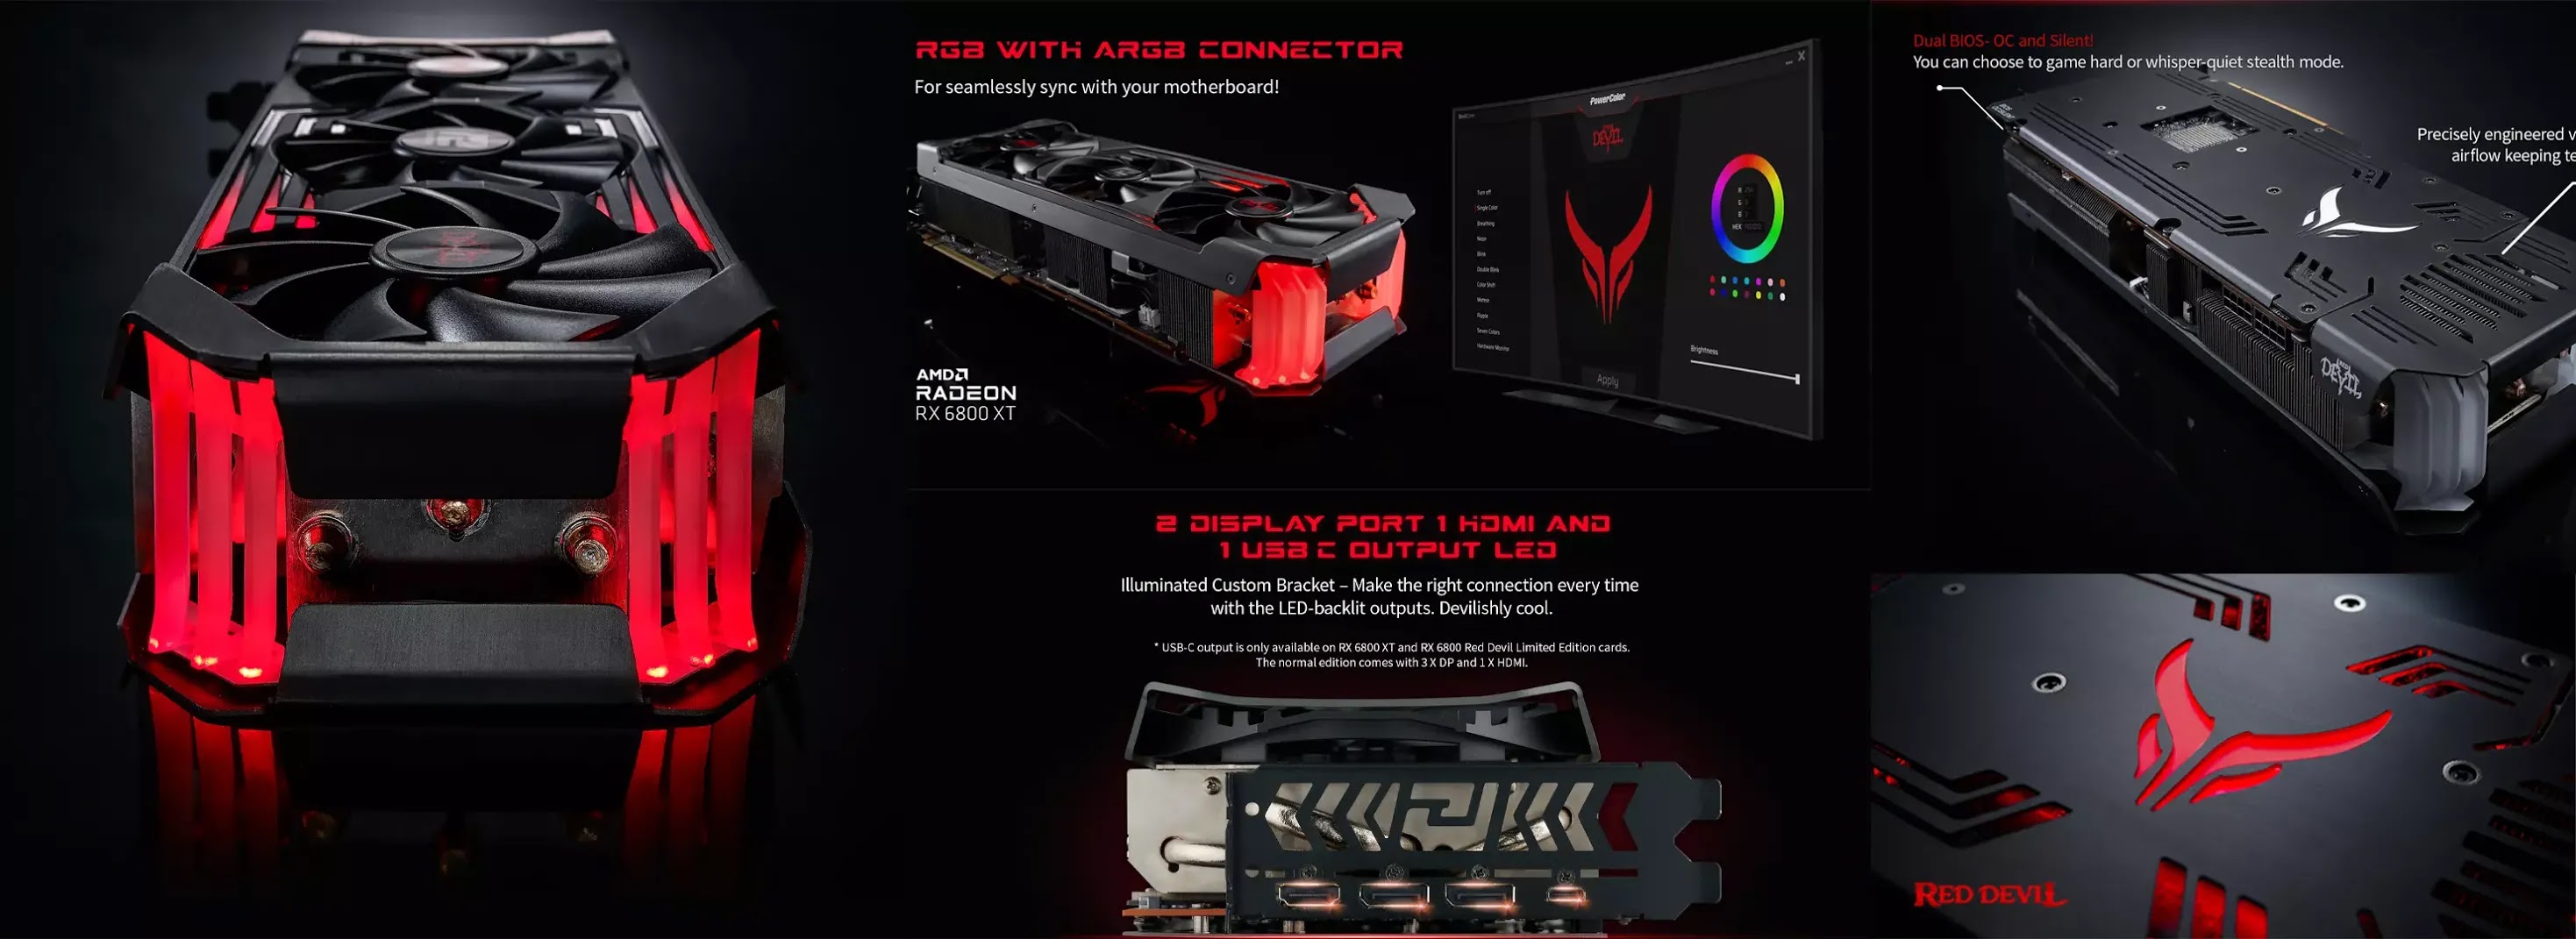 Here S A List Of All Amd Radeon Rx 6800 Xt Aib Models With Specifications Like Boost Clock Power Consumption More Pc Seekers